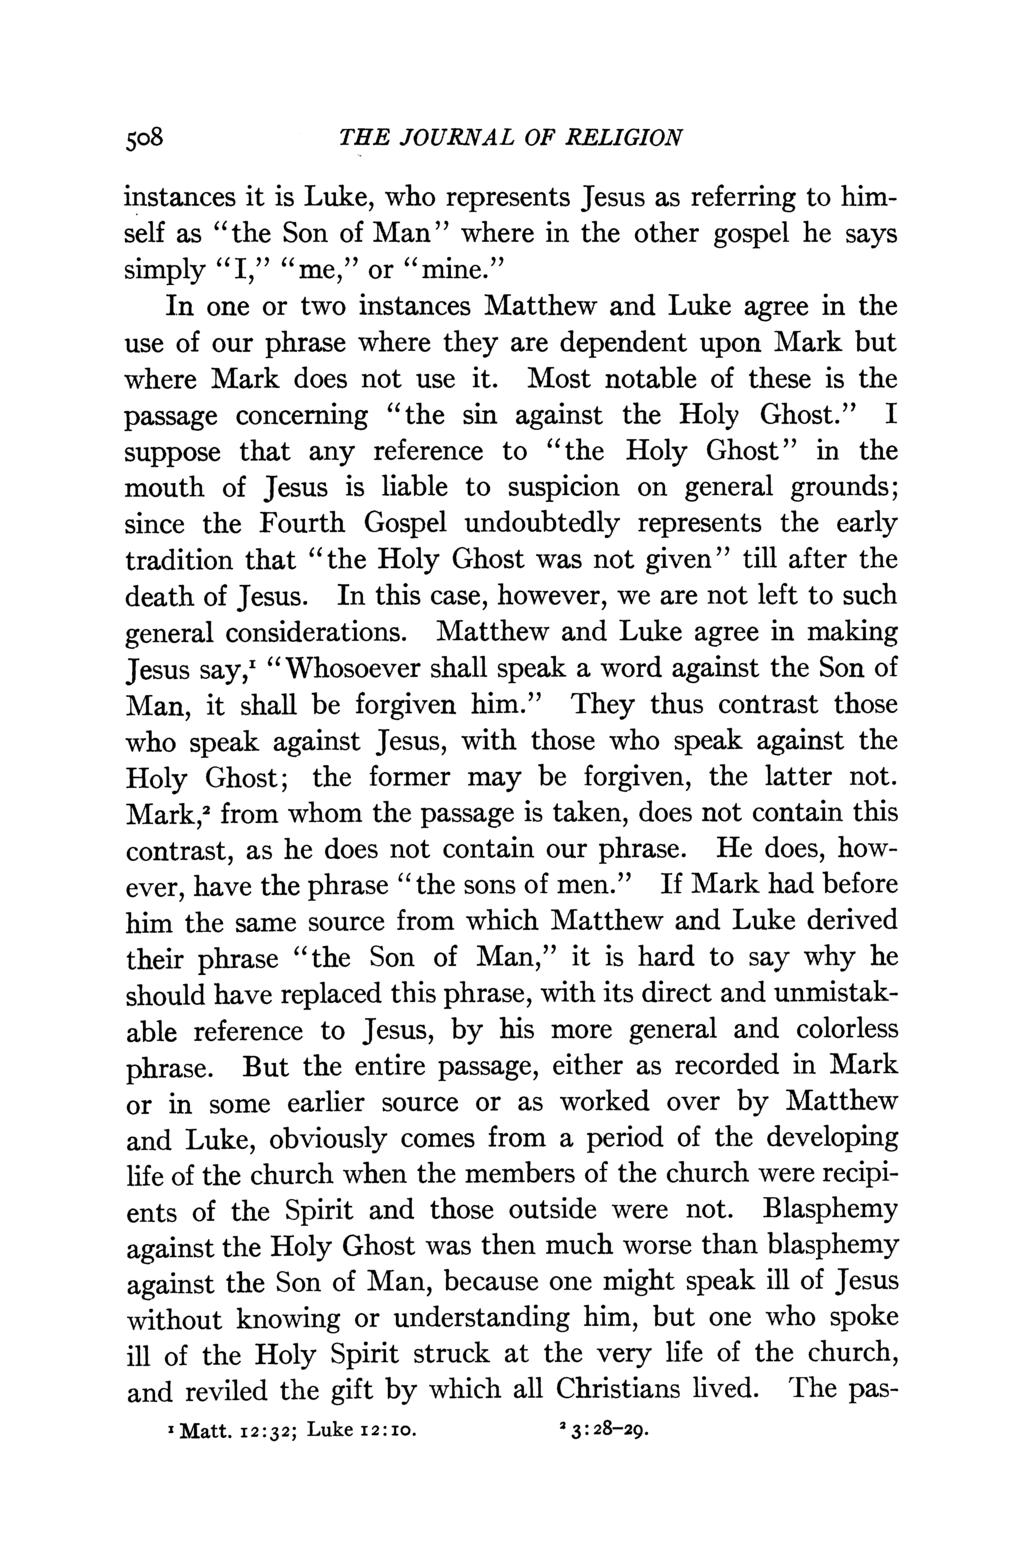 508 THE JOURNAL OF RELIGION instances it is Luke, who represents Jesus as referring to himself as "the Son of Man" where in the other gospel he says simply "I," "me," or "mine.